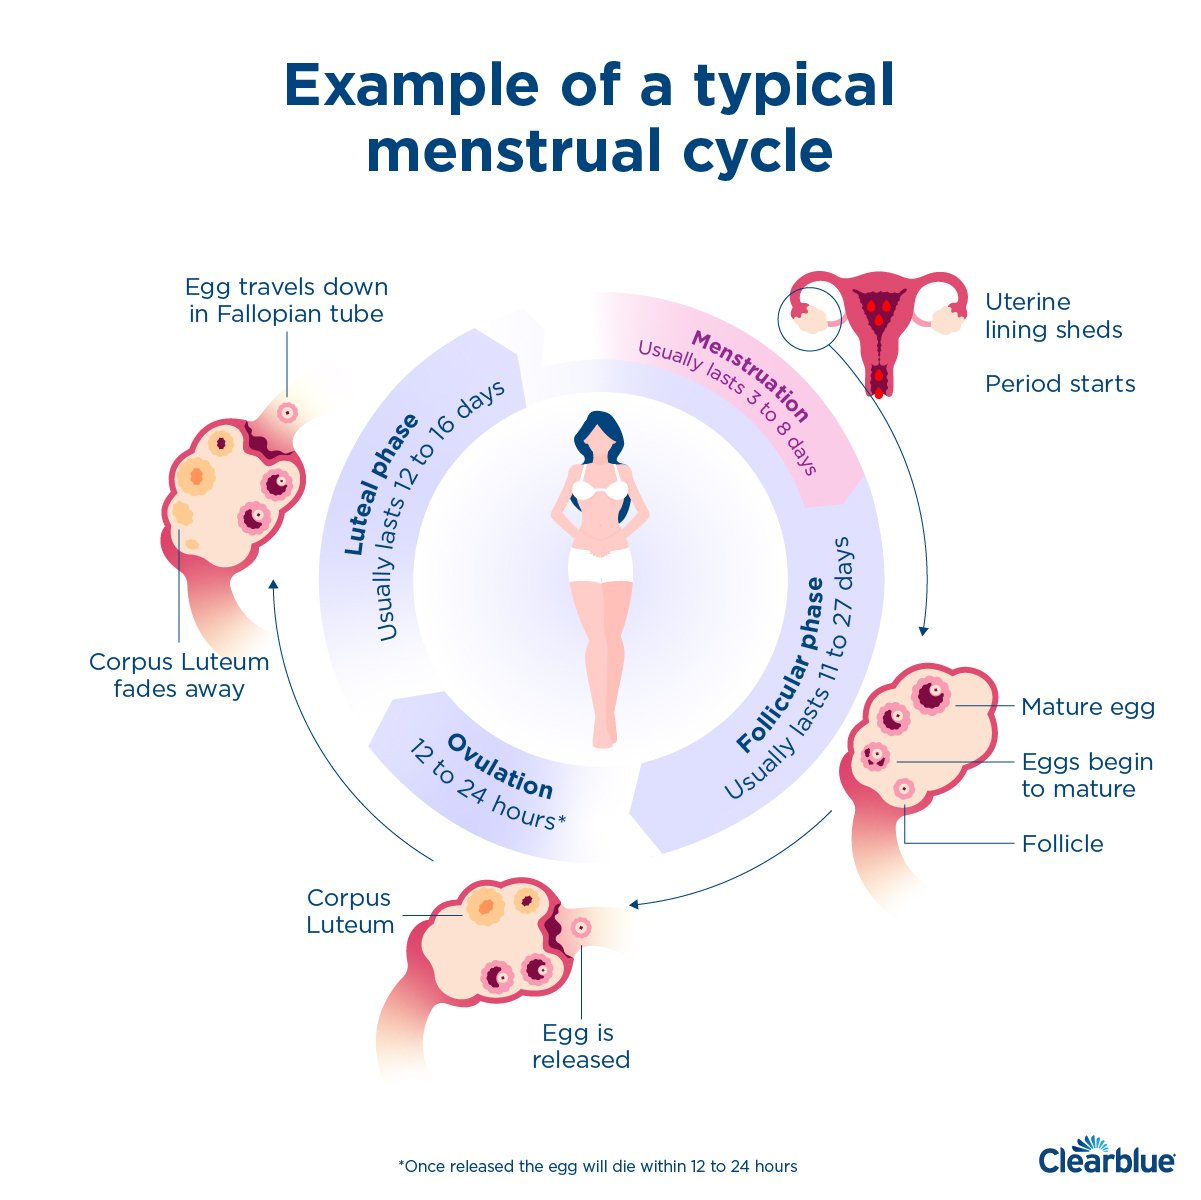 Possible Causes of Abnormal Periods